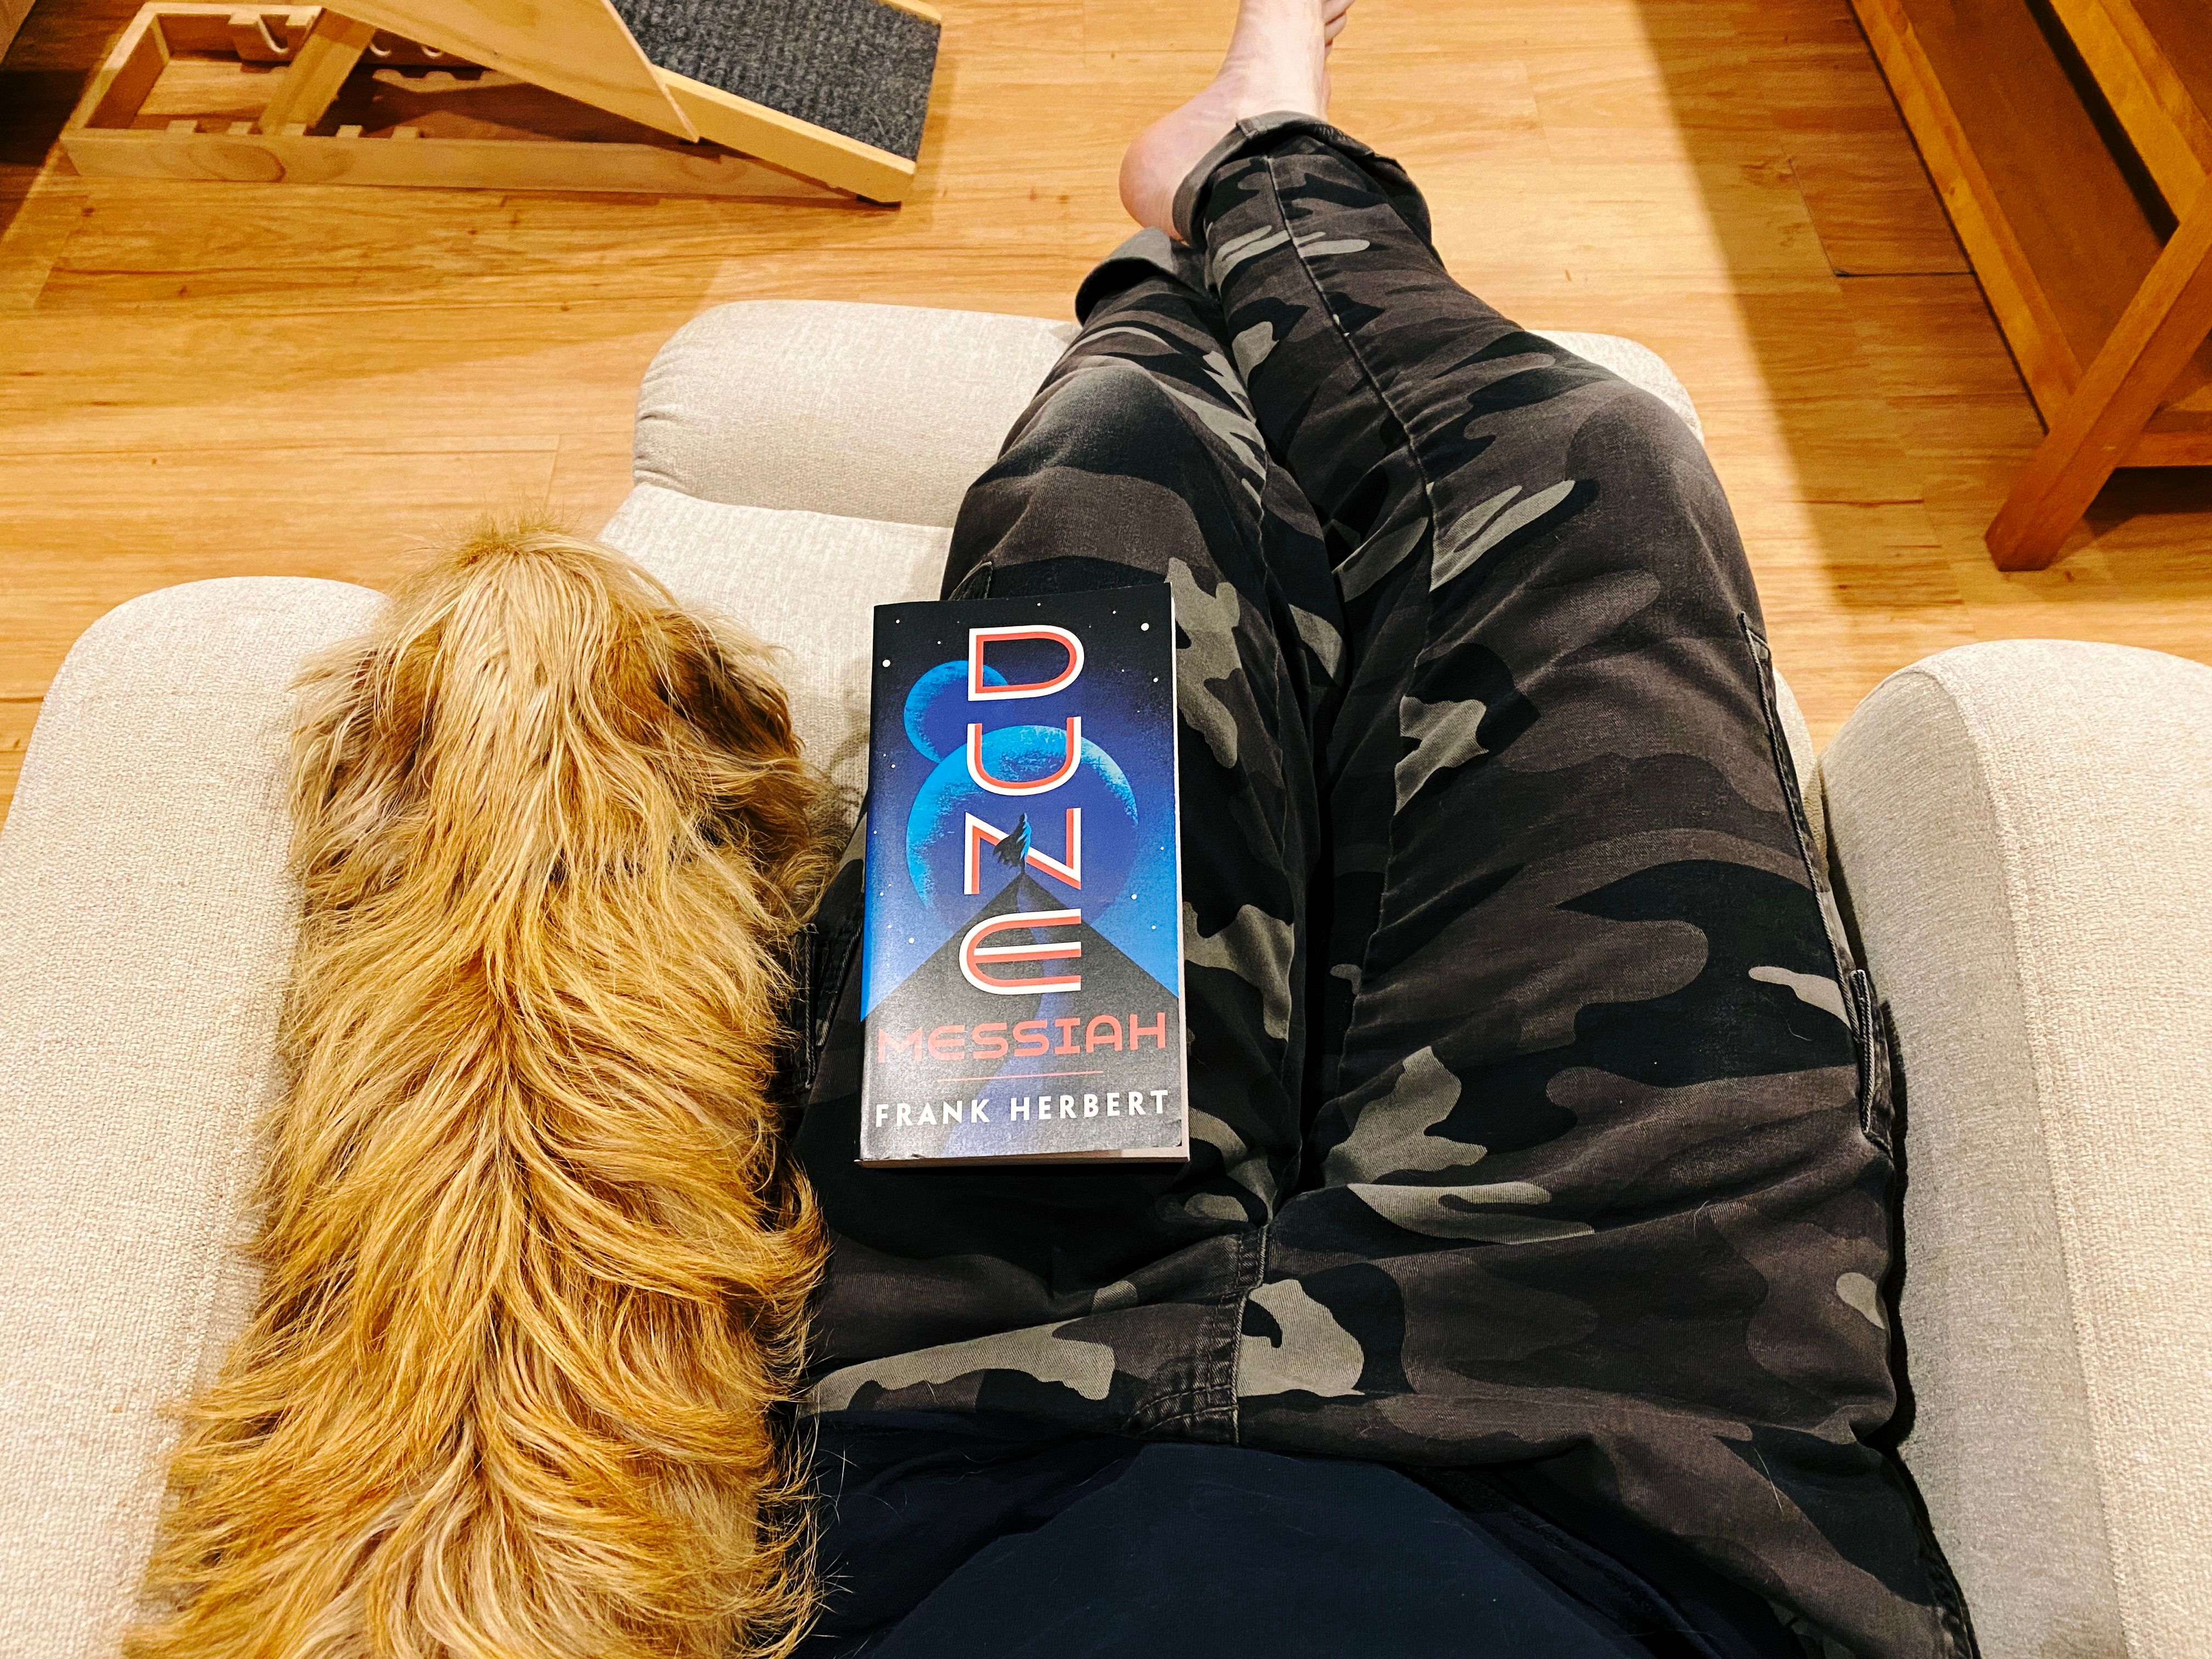 A photo taken from my perspective looking down towards my lap, I'm sitting in a single seat lounge chair with my legs reclined. On my lap is the novel Dune Messiah and wedged next to me between my left thigh and the arm of the chair is a small scruffy blonde dog.